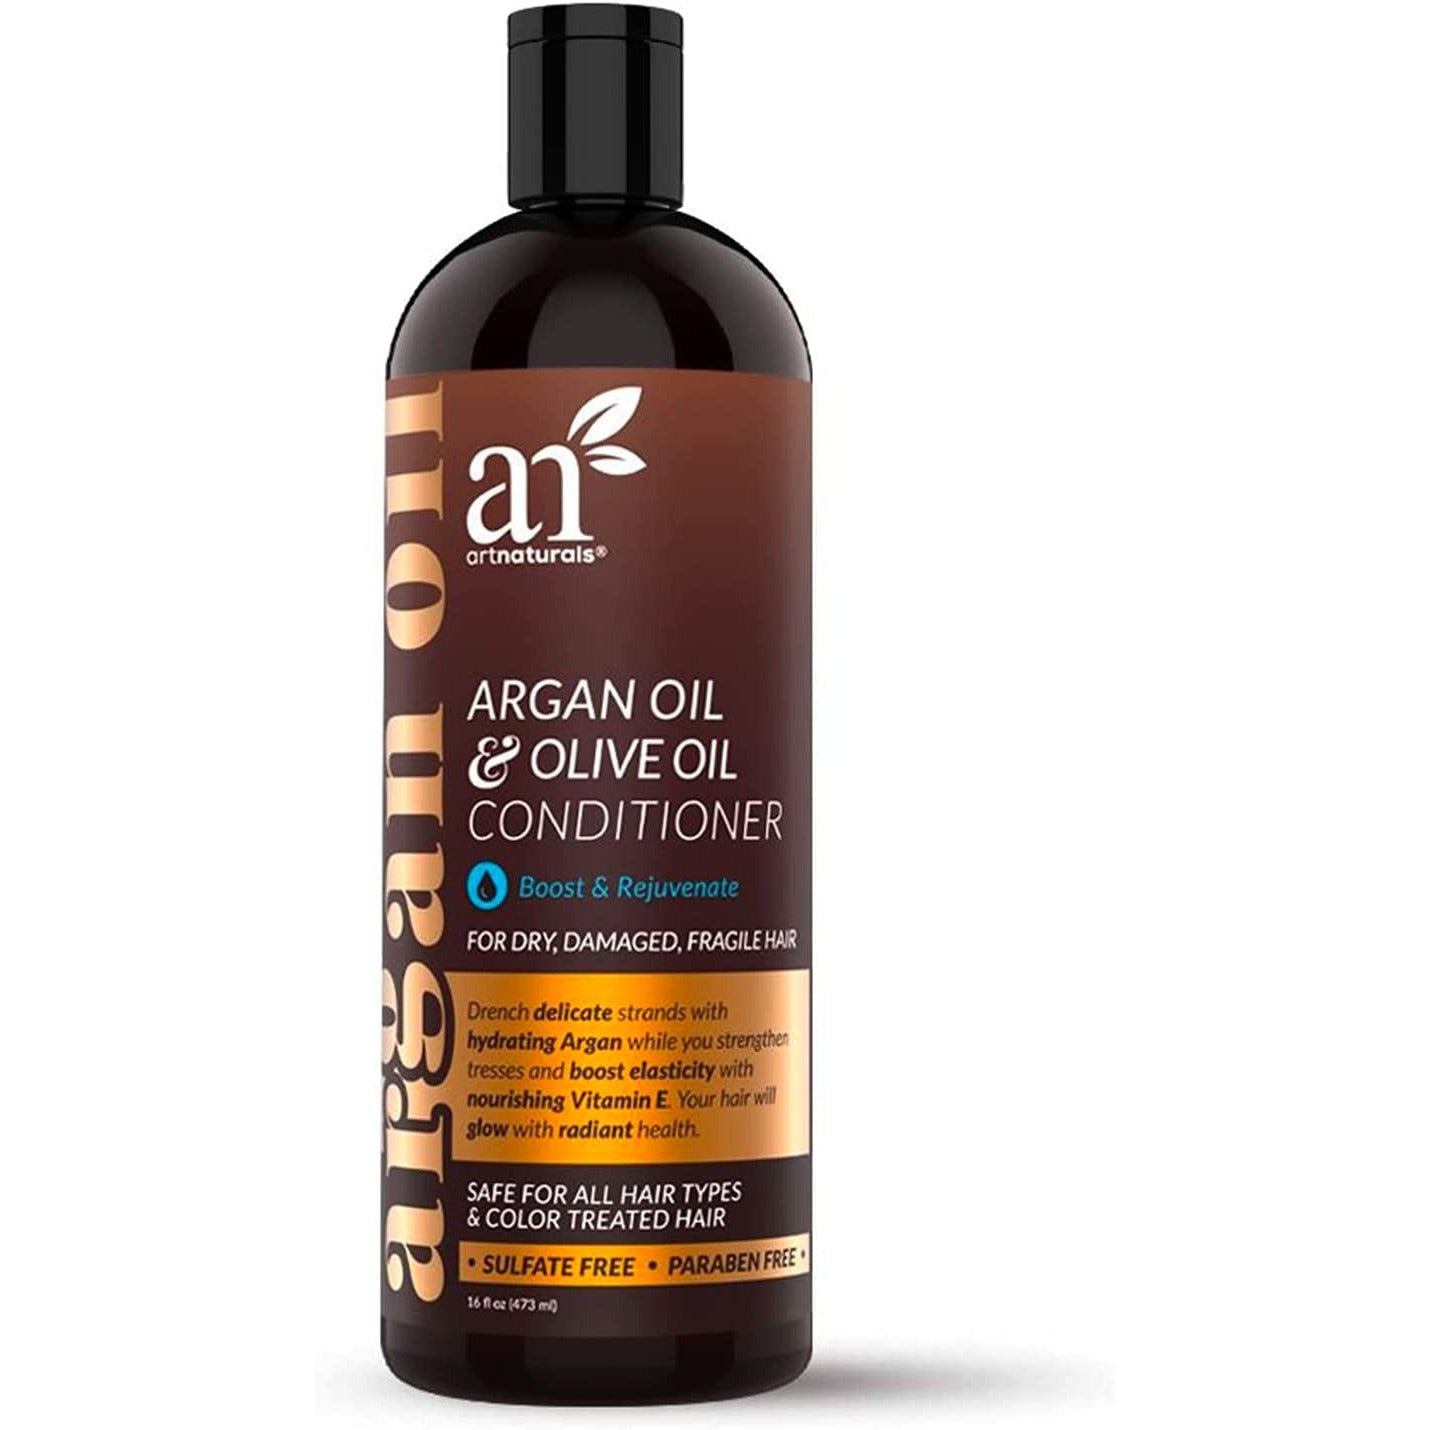 Artnaturals Argan-Oil Conditioner for Hair-Regrowth - (16 Fl Oz / 473Ml) - Sulfate Free - Treatment for Hair Loss and Thinning - Growth Product for Men & Women - Infused with Biotin